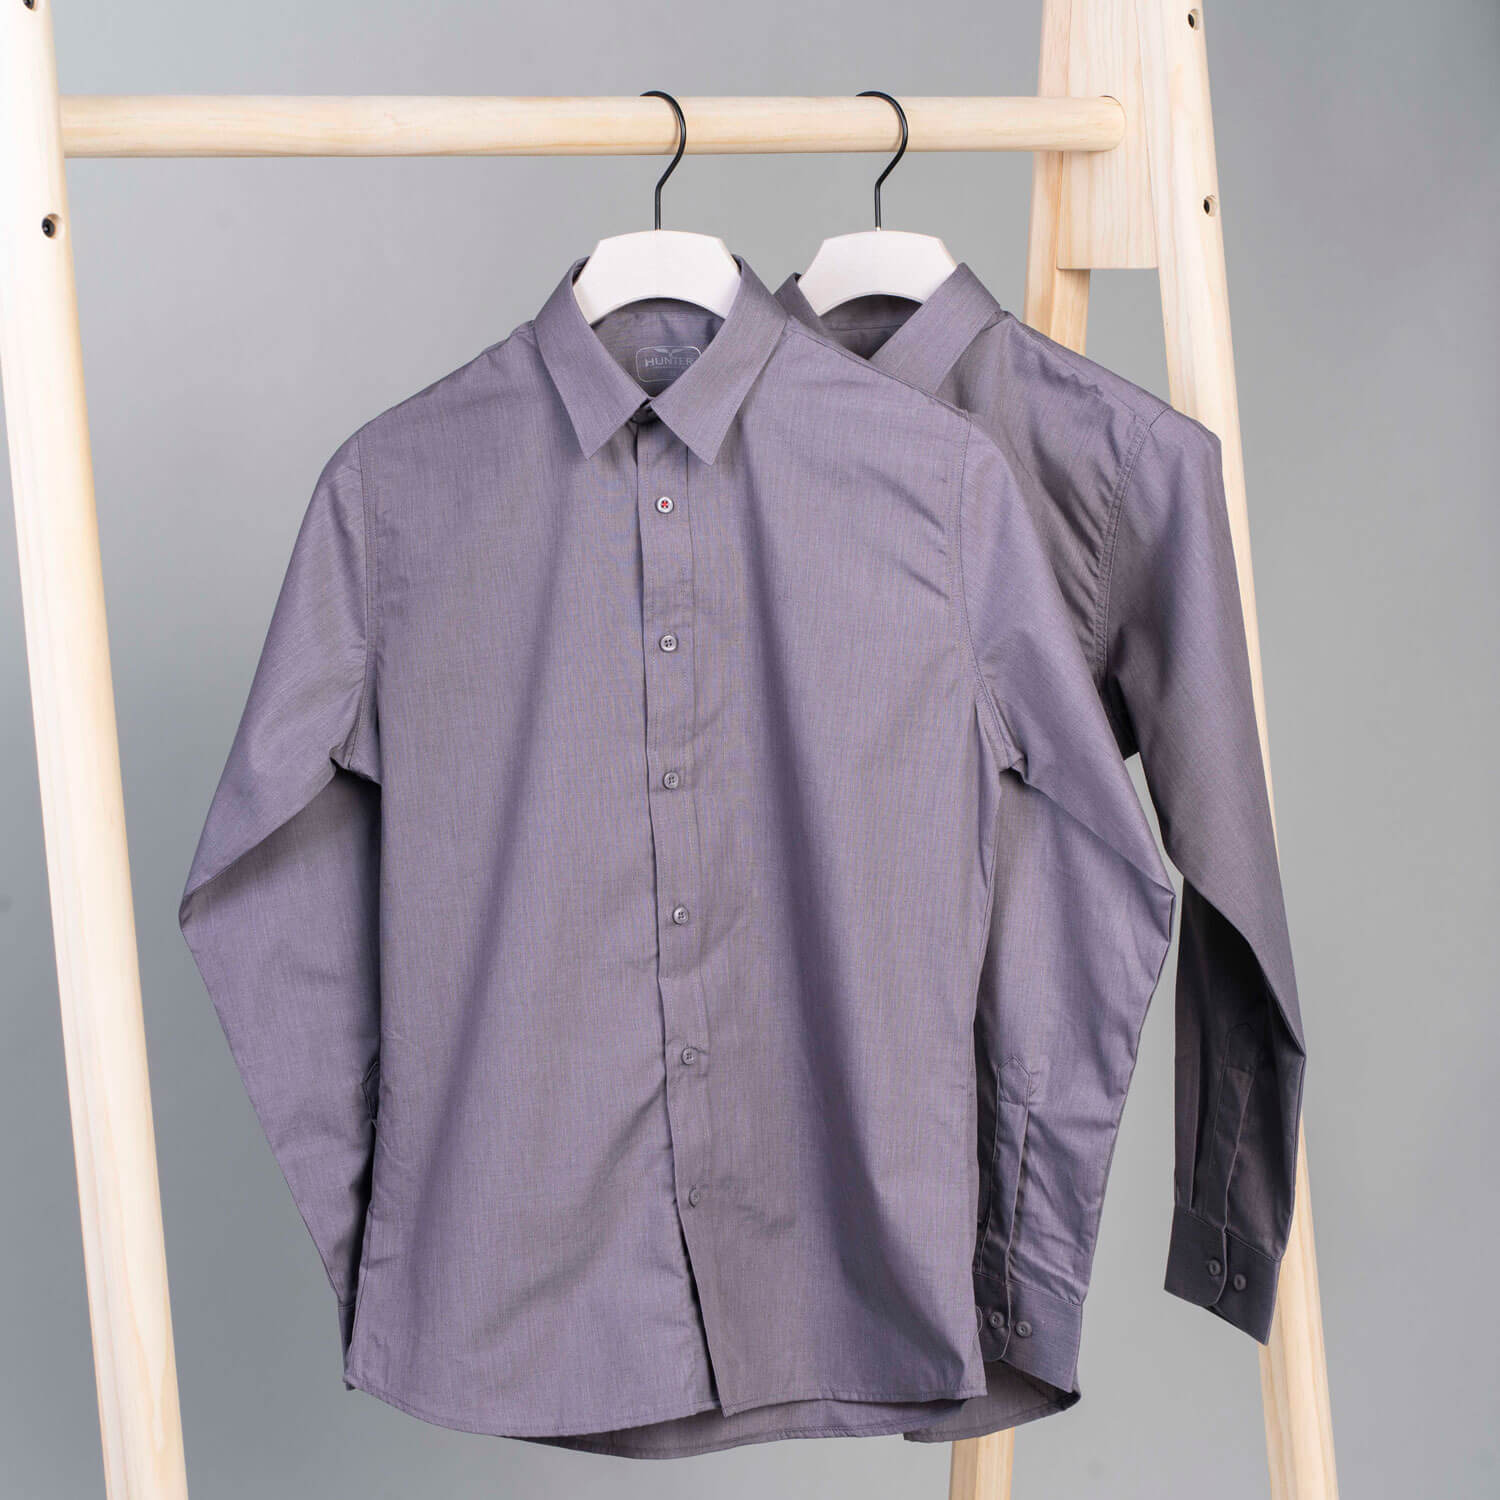 Hunter Long-Sleeve Slim Fit 2 Pack Shirts - Grey 1 Shaws Department Stores